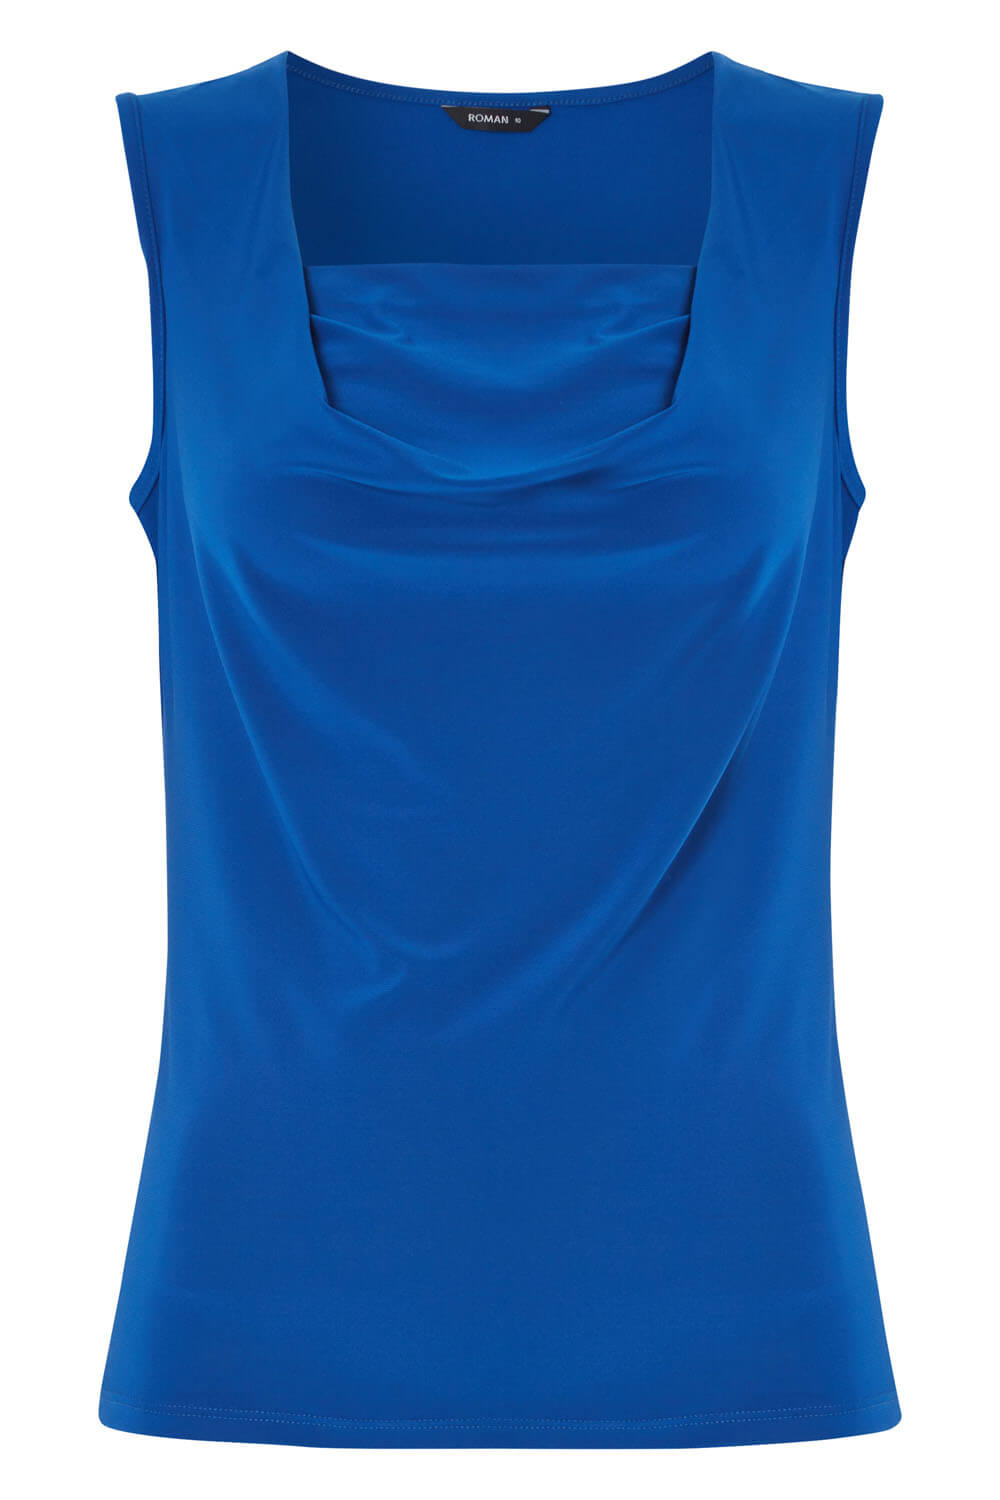 Royal Blue Cowl Neck Sleeveless Top, Image 5 of 5